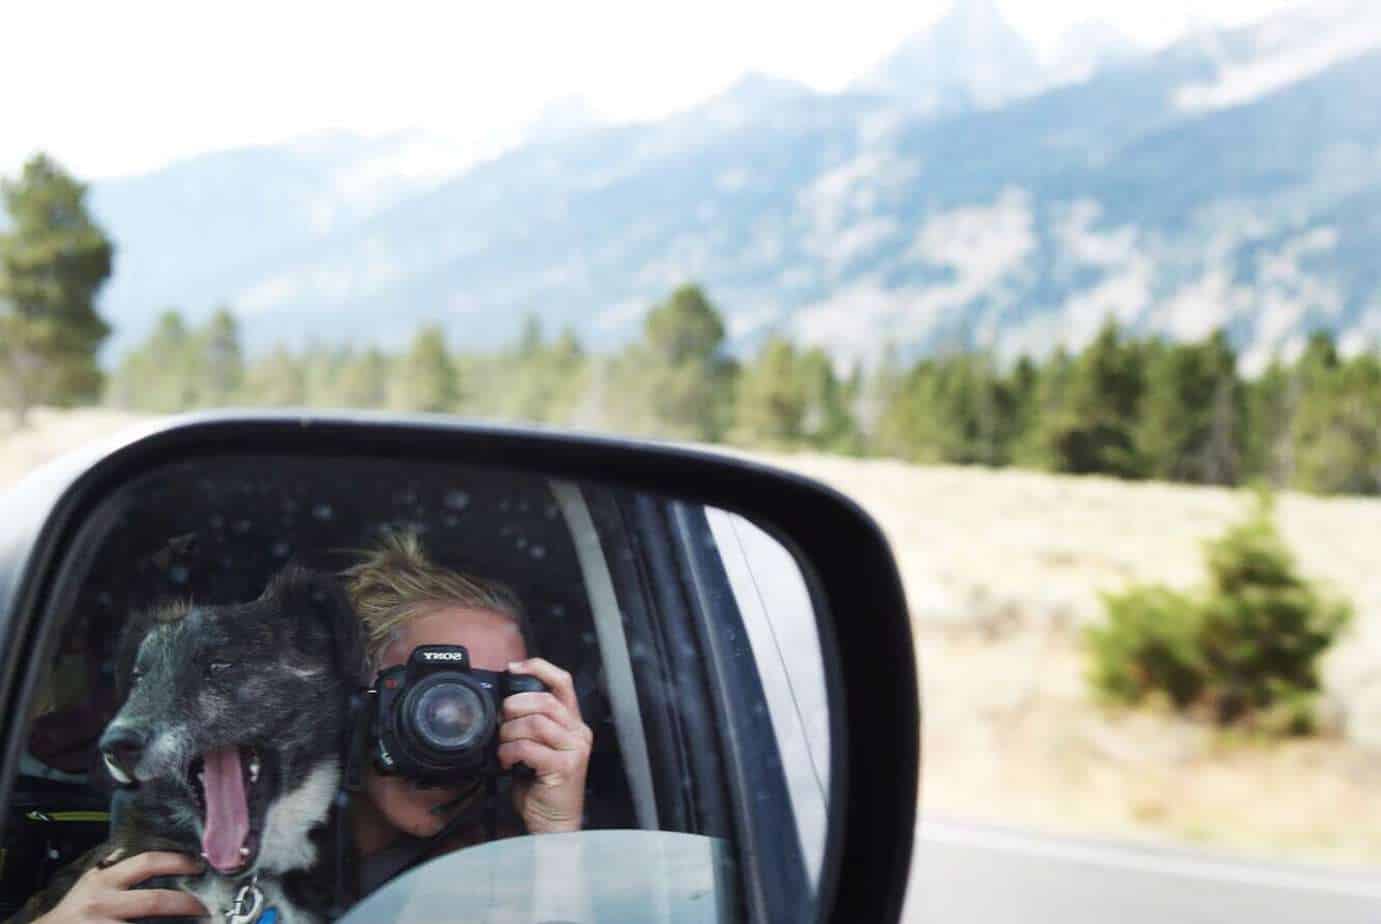 Emily Trost taking a photo of herself with Montana on their car's side window